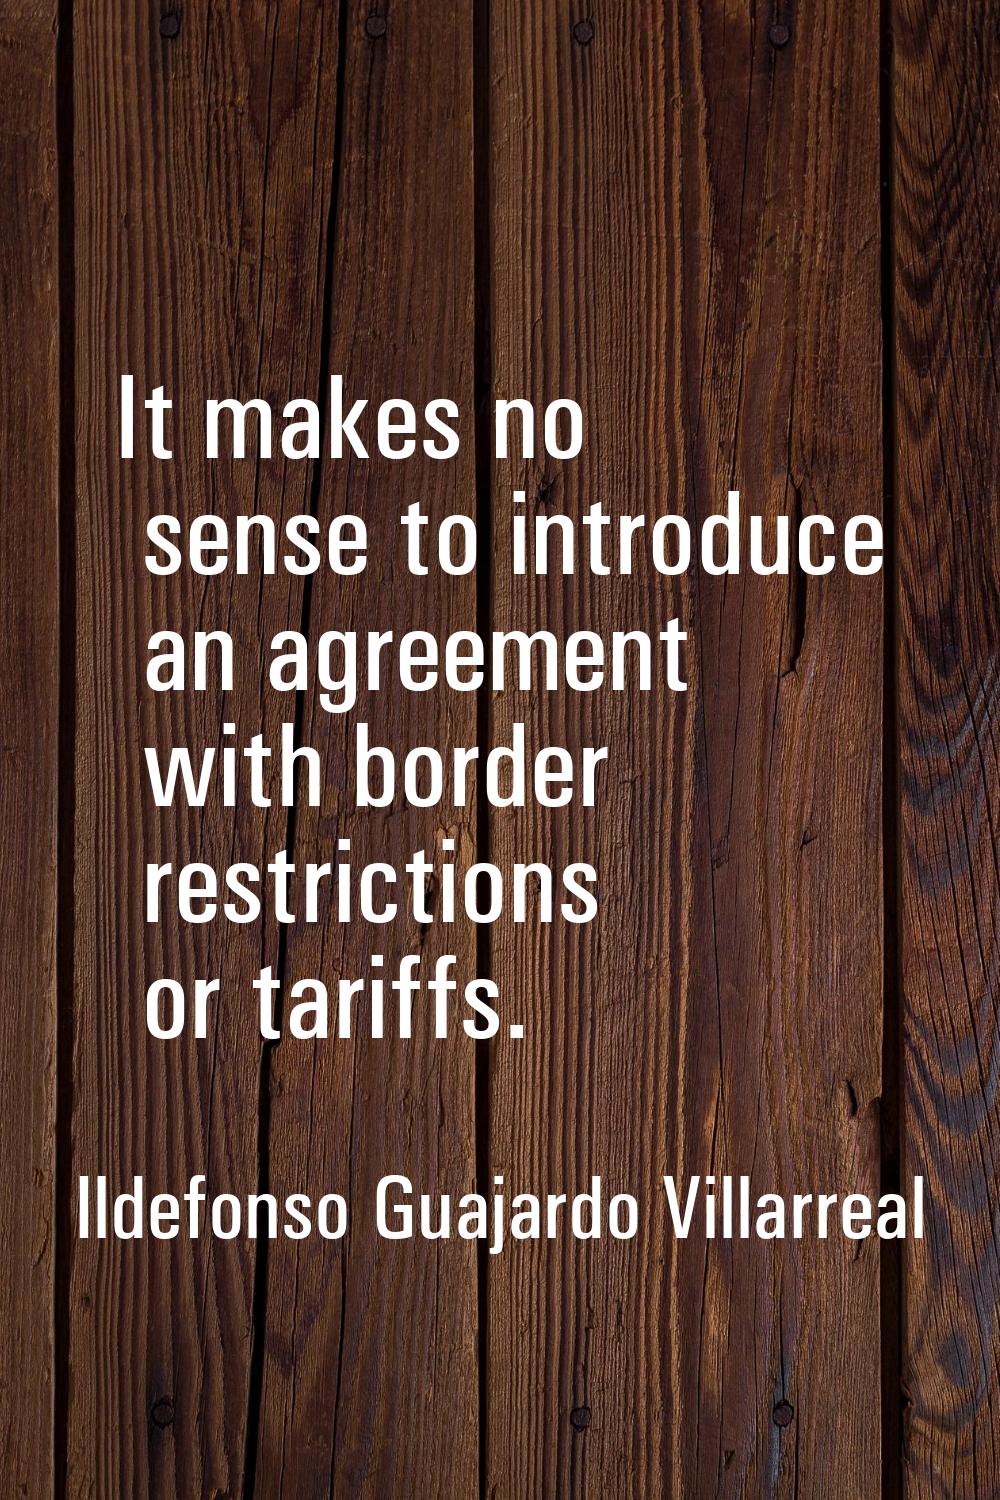 It makes no sense to introduce an agreement with border restrictions or tariffs.